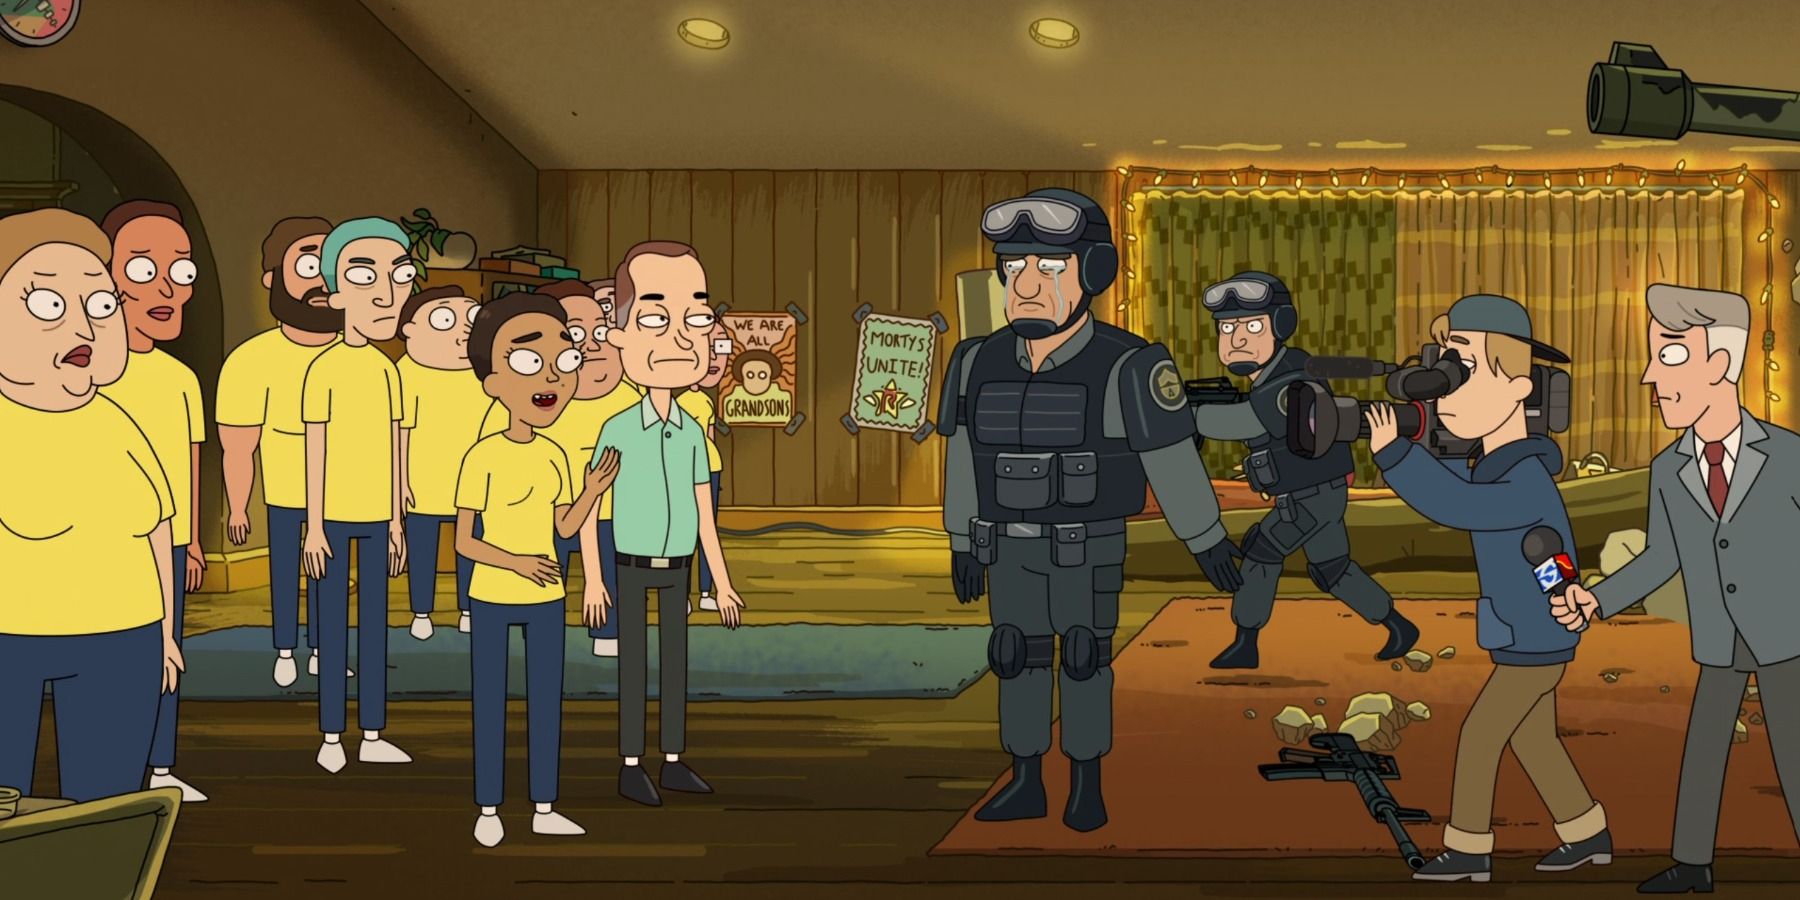 Roy video game Mortys and Police standoff Rick and Morty